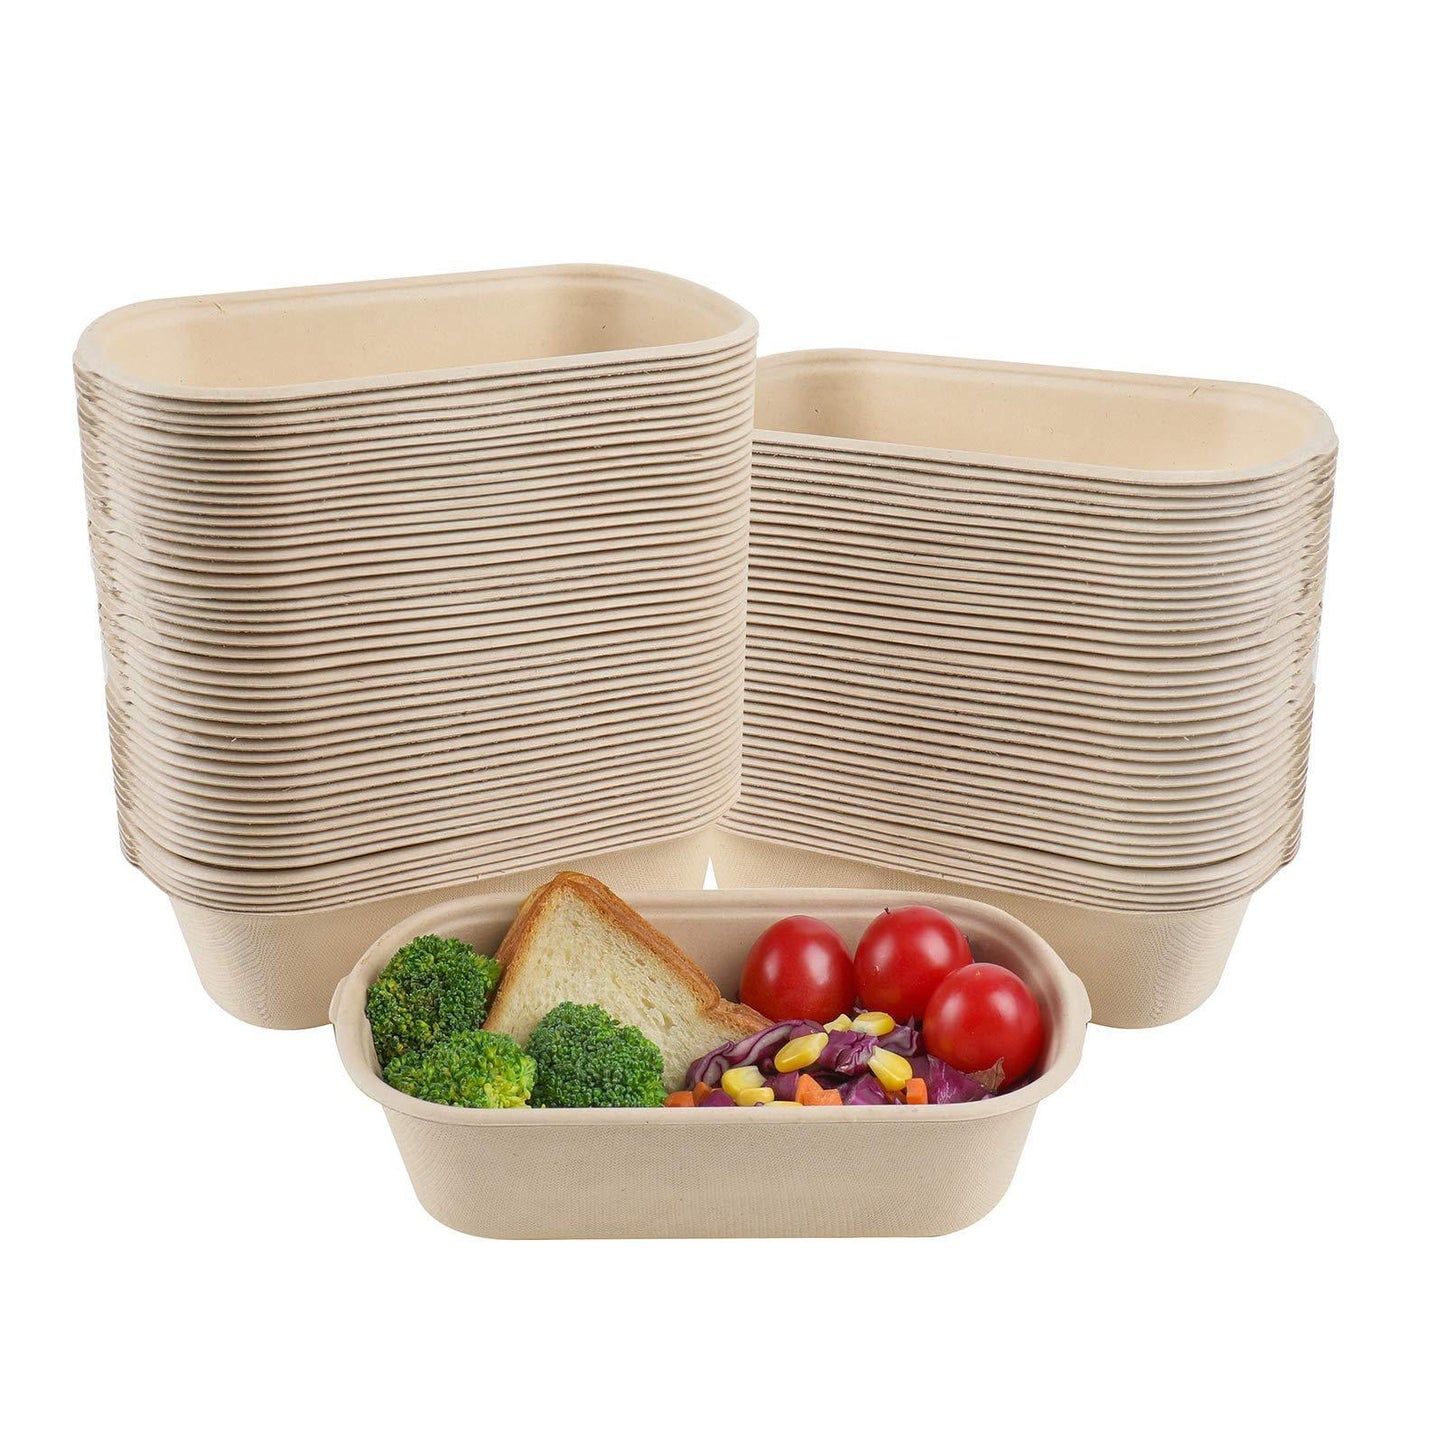 Disposable Biodegradable Sugarcane Bagasse Takeaway Food Packaging Box With Covers